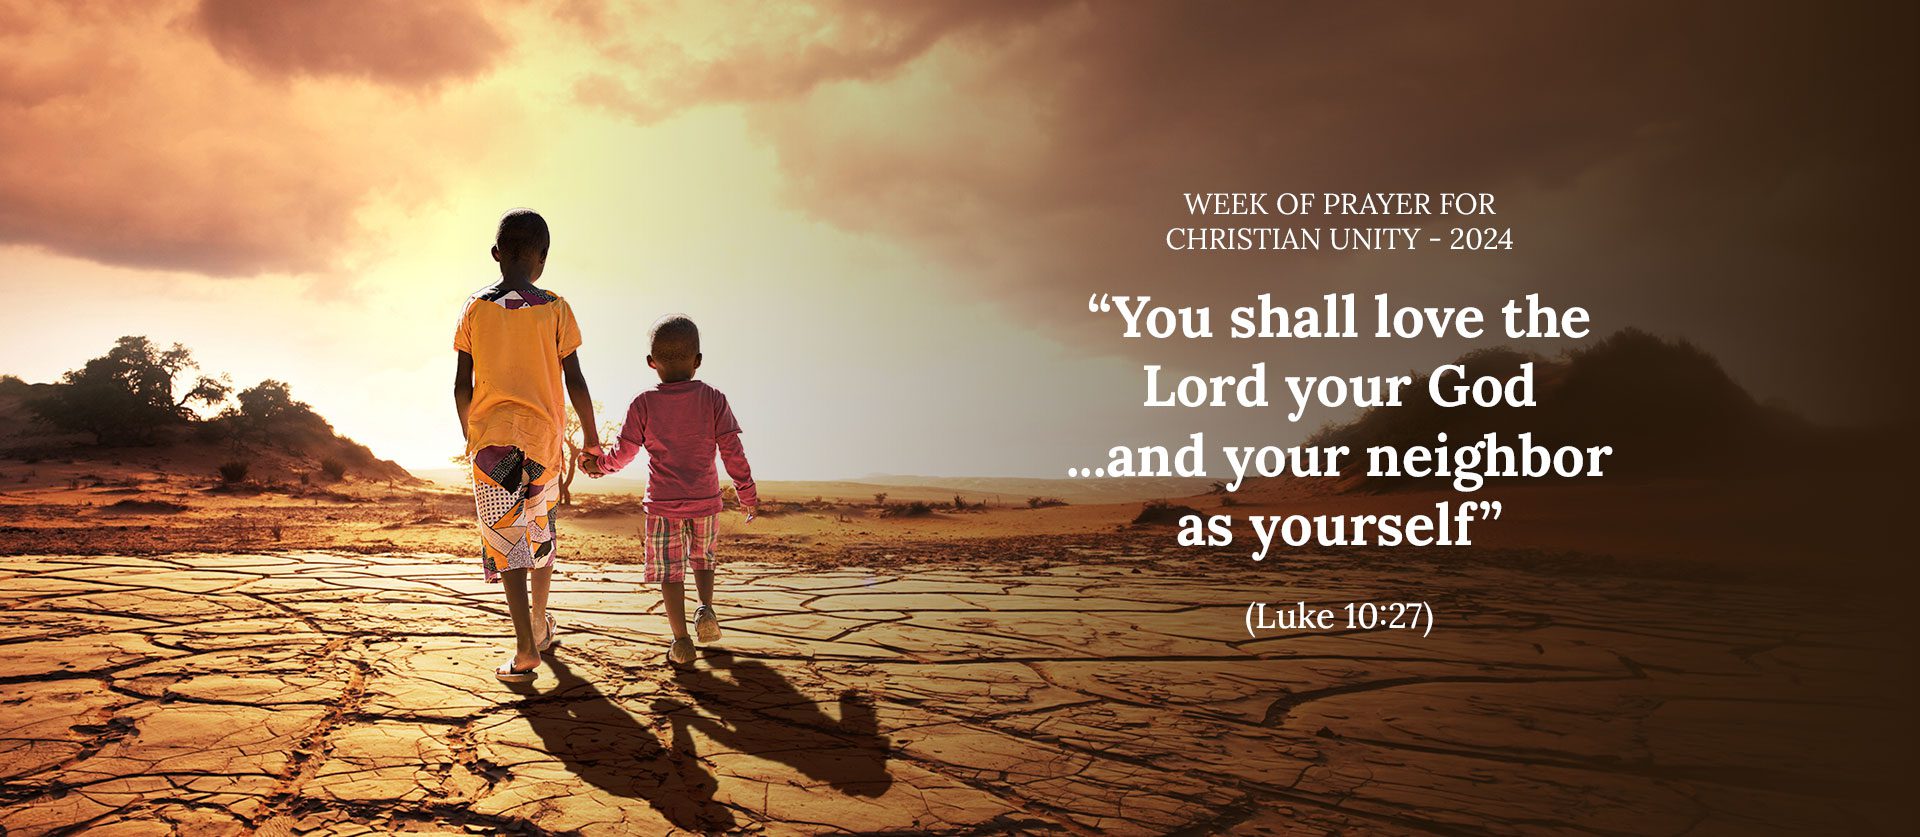 2024 Week of Prayer Theme Announced “You shall love the Lord your God